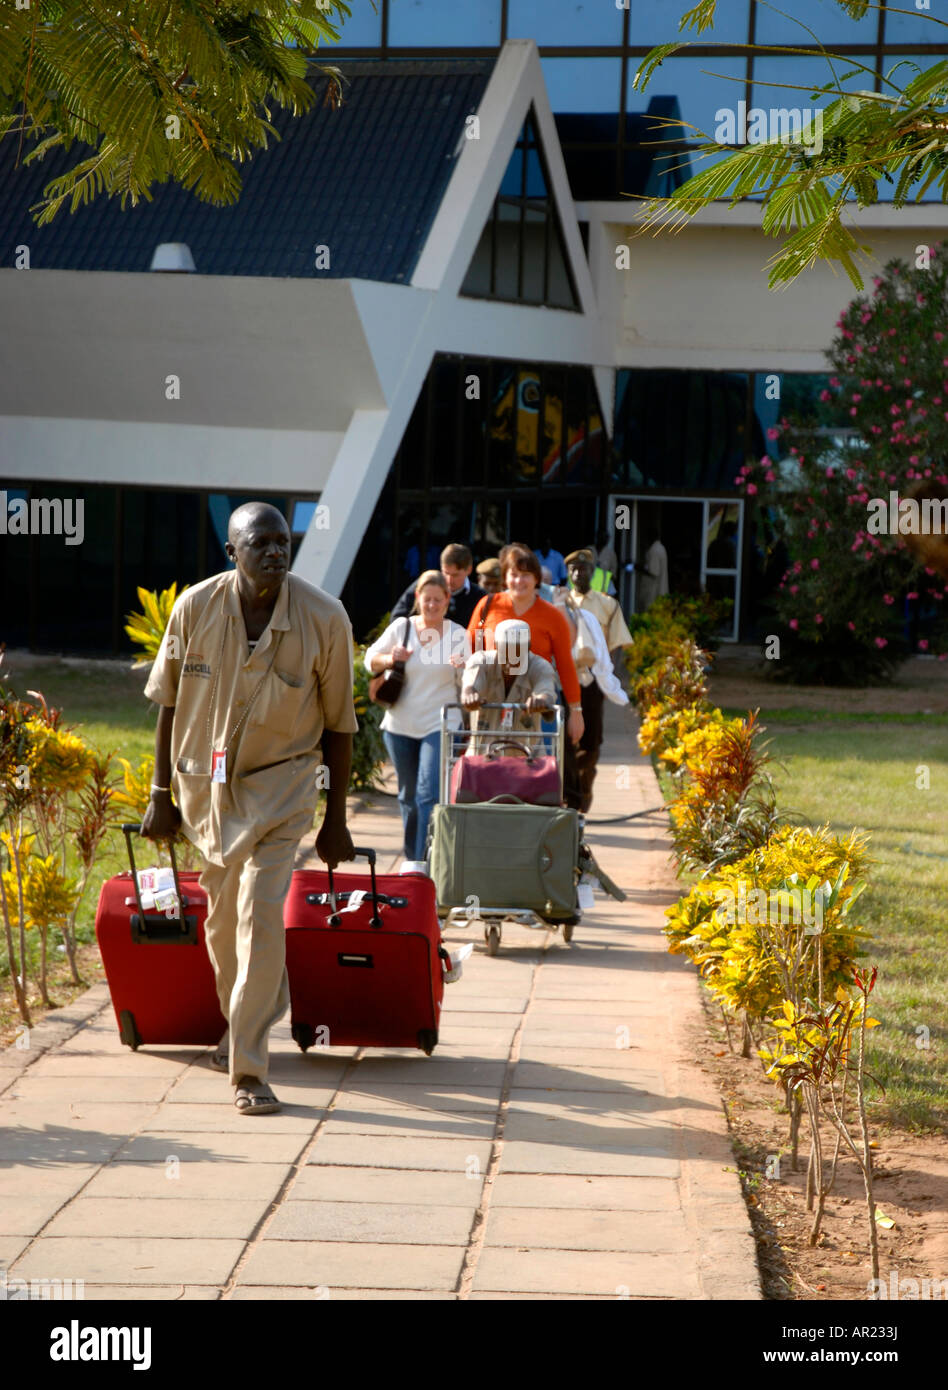 DZP Tourists arrive at Banjul Airport being helped by porters The Gambia Dec 2007 Stock Photo